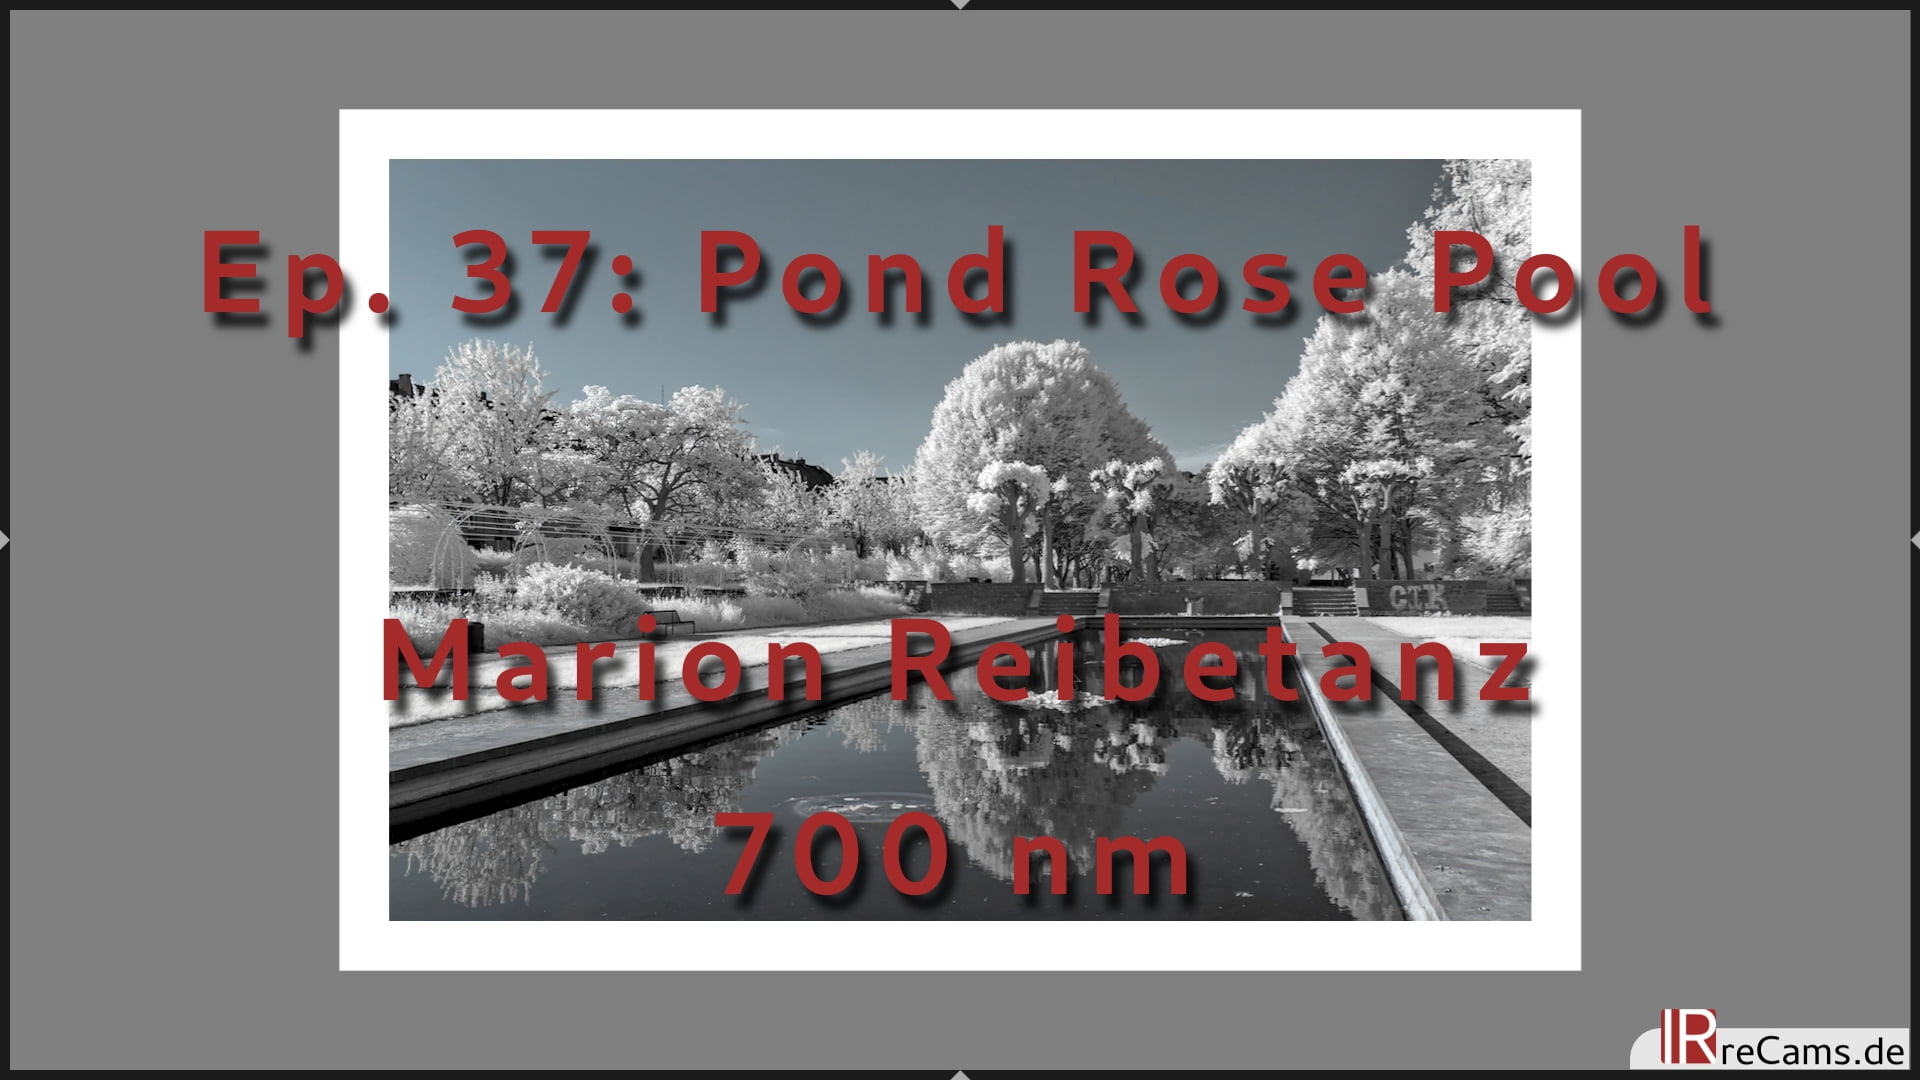 Ep. 37: Pond Rose Basin in Infrared - Colokey Image editing with 700 nm Filter